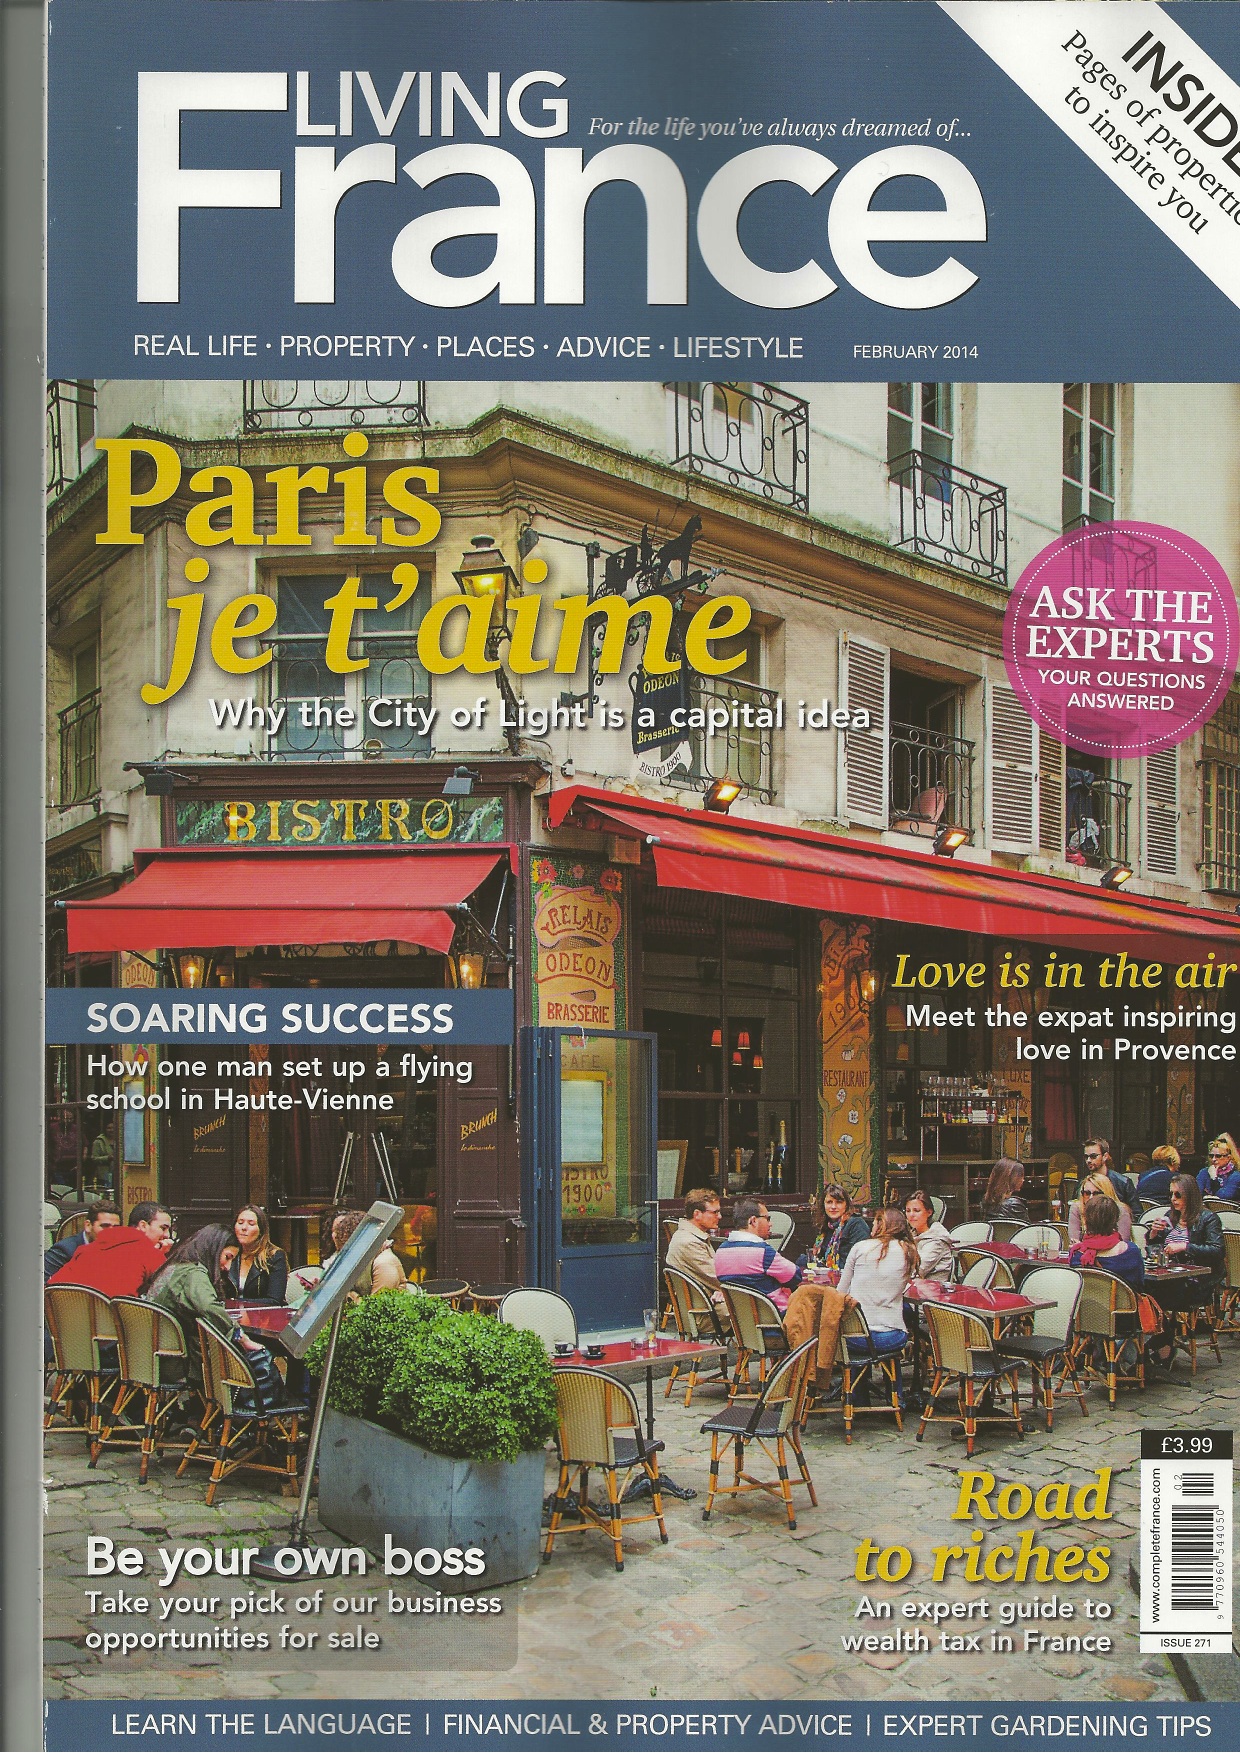 Living France Magazine – Ask the Experts